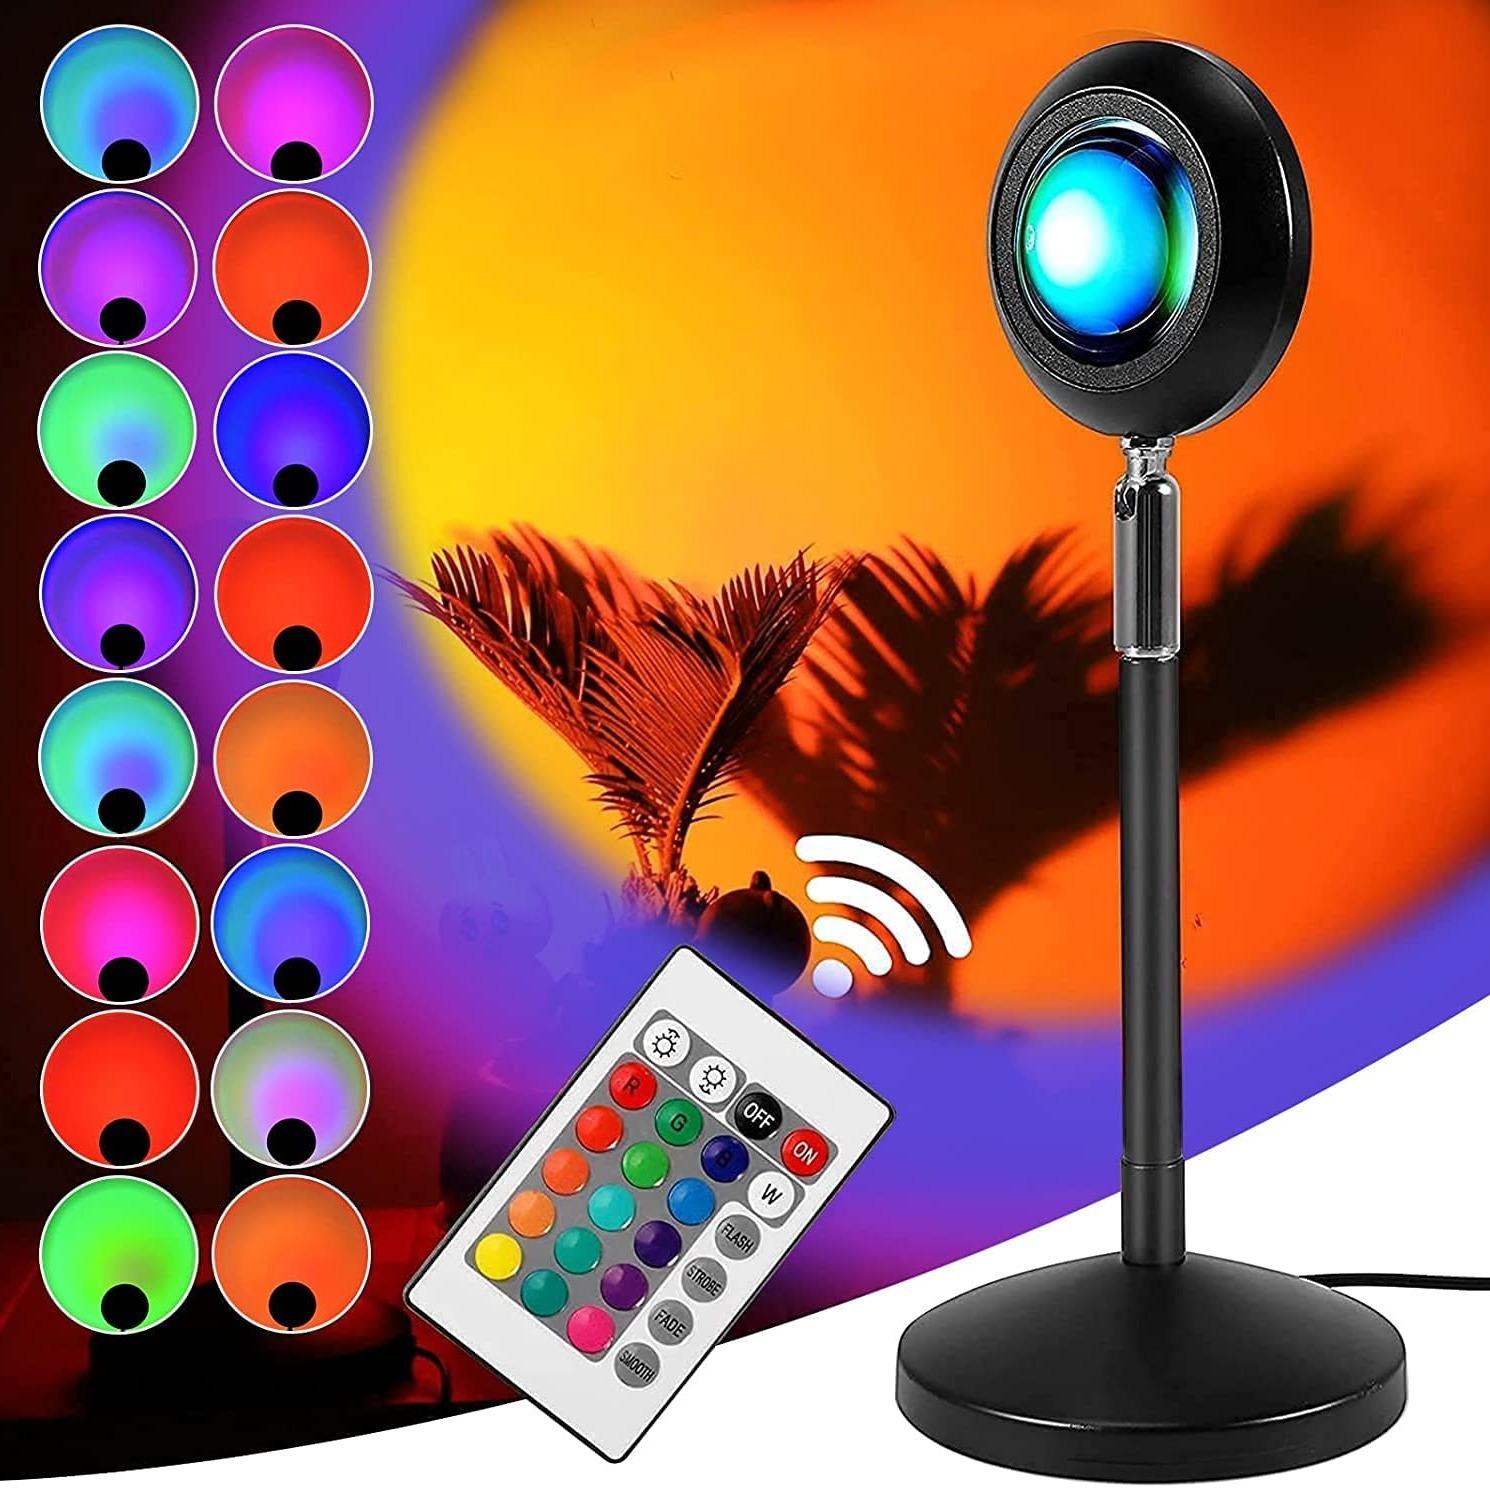 GKcity UpgradedSmart Sunset Lamp Projection, 16 Colors LED Sunset  Projection Lamp APP and Remote Control(Include USB Charger)360 Degree  Rotation